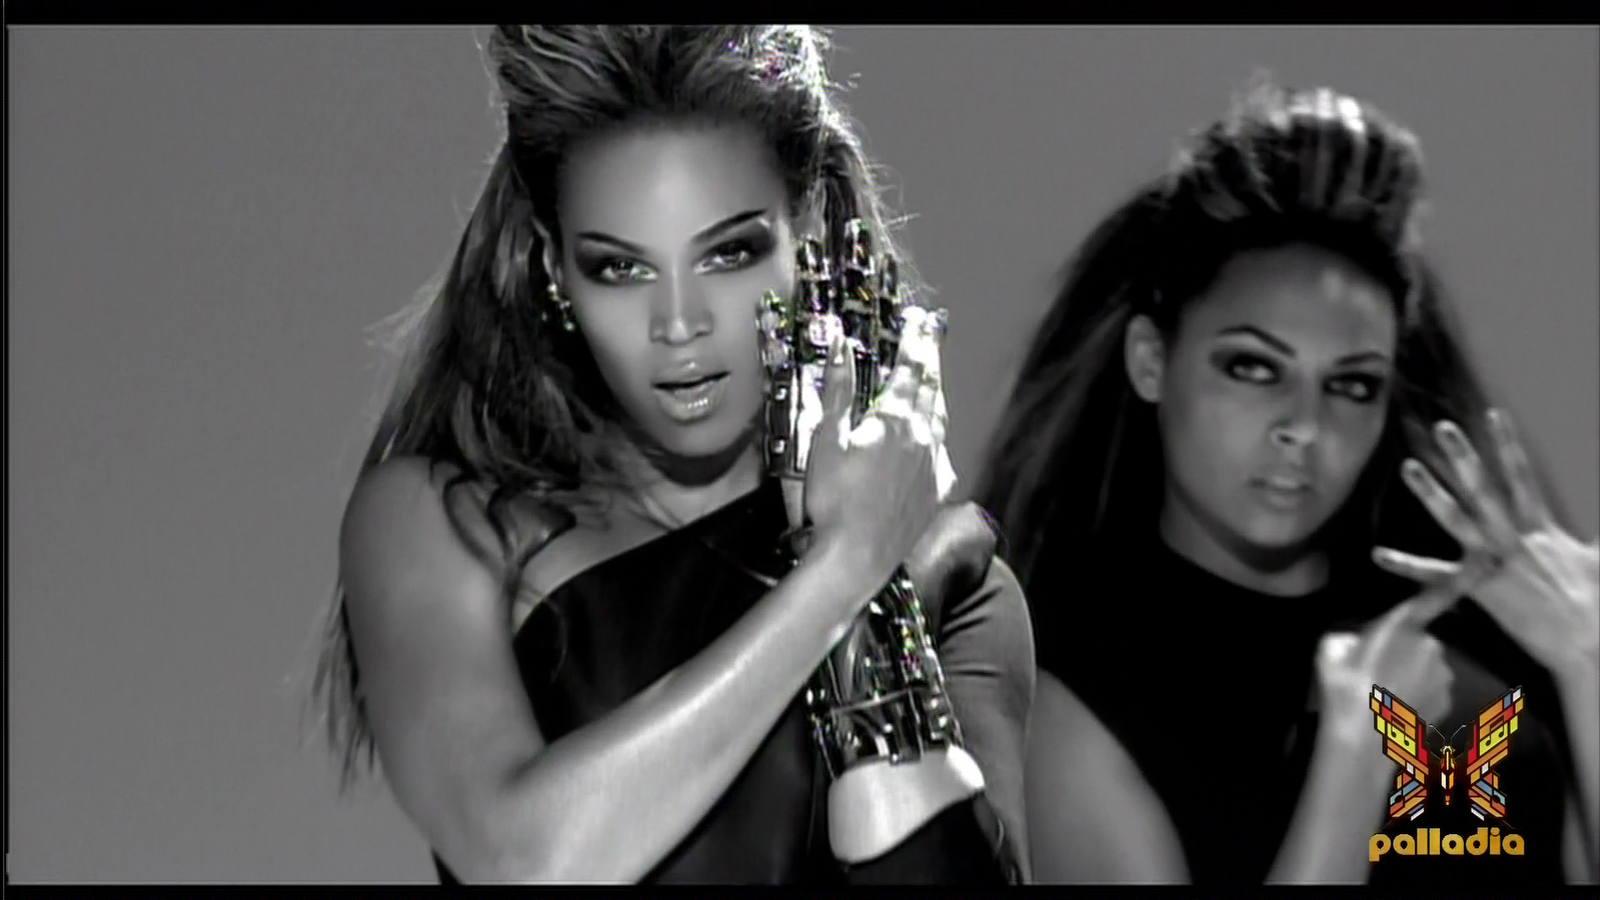 Skull ladies free beyonce mp3 single download HOMECOMING: THE